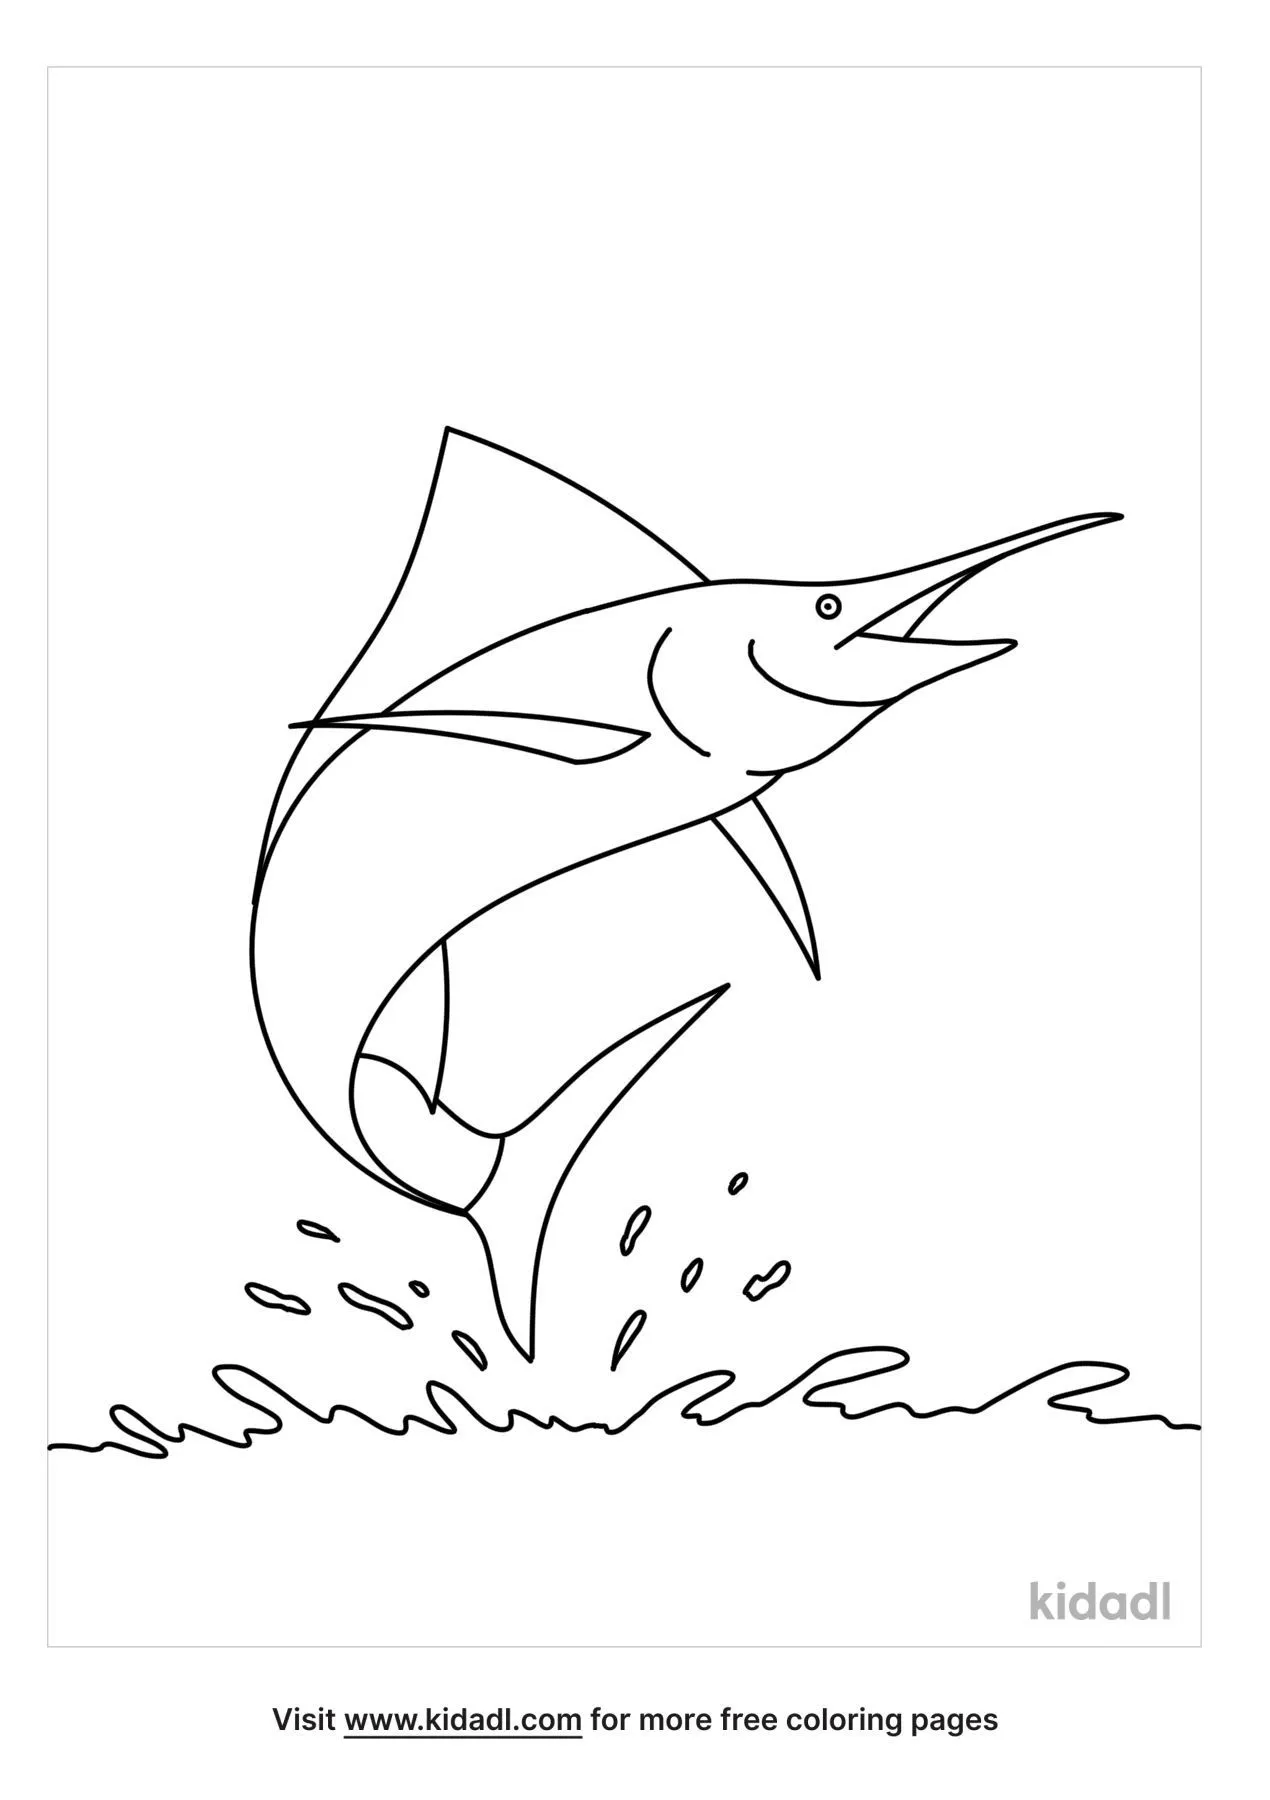 Marlin Jumping Out Of Water Coloring Page